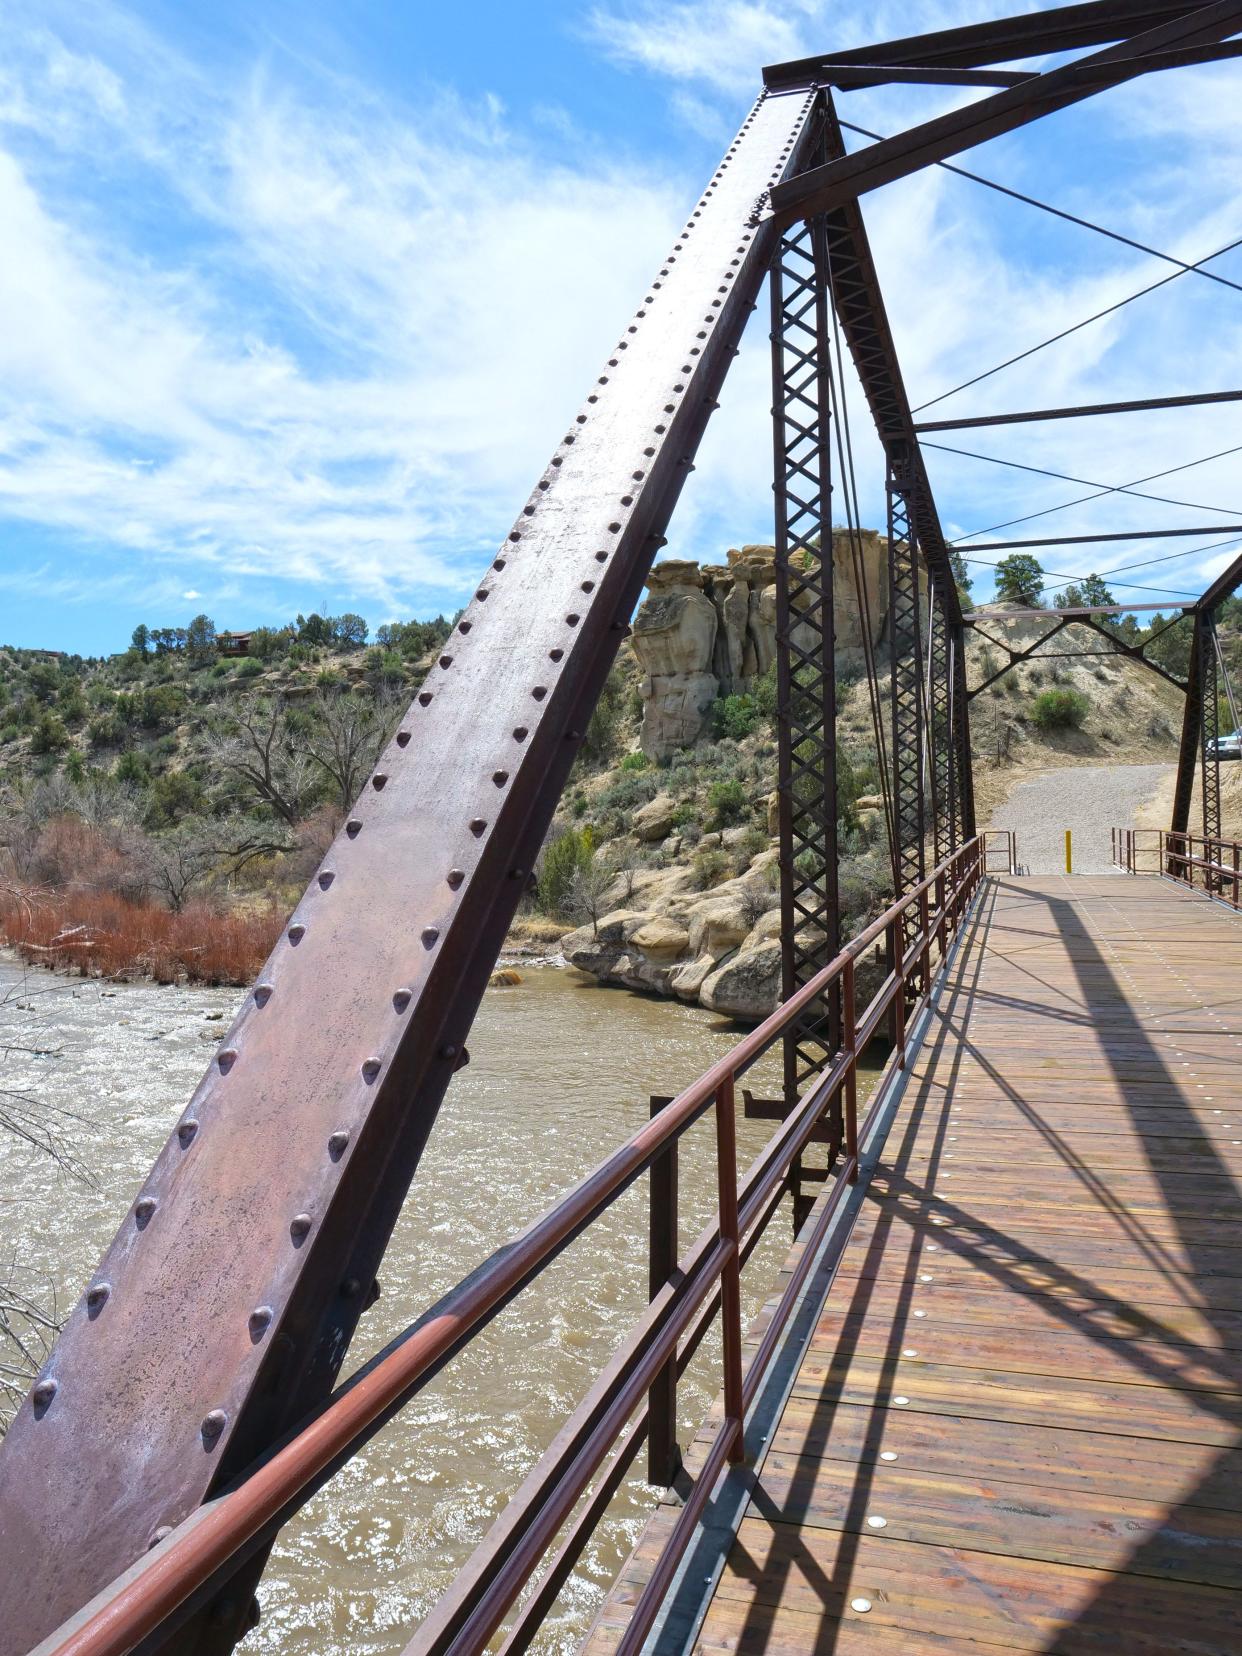 A ribbon-cutting ceremony for the refurbished pedestrian bridge over the Animas River in Cedar Hill will be held by San Juan County officials at 2 p.m. Tuesday, April 30.